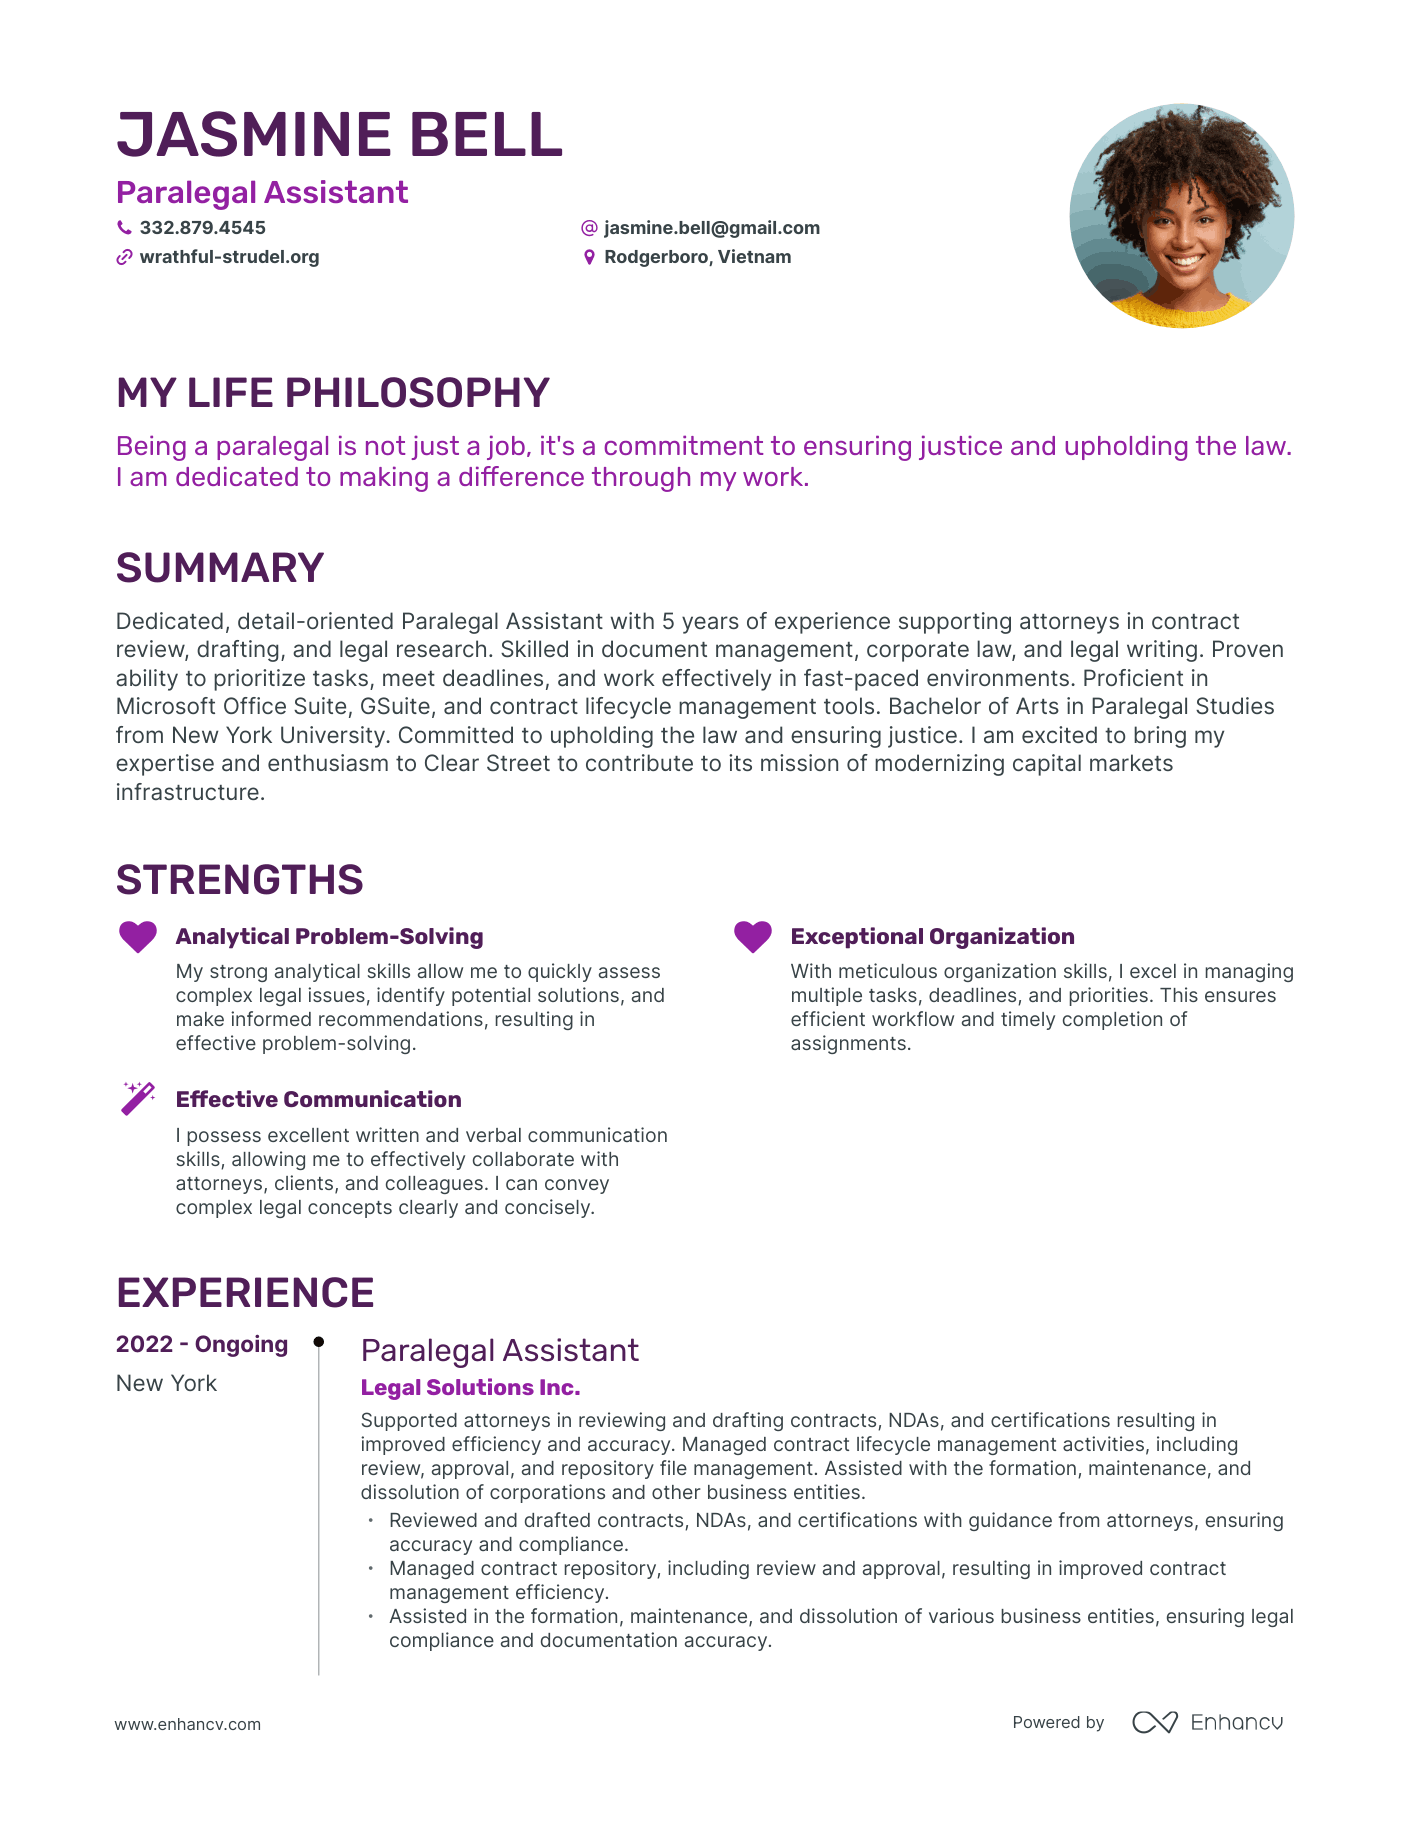 Creative Paralegal Assistant Resume Example